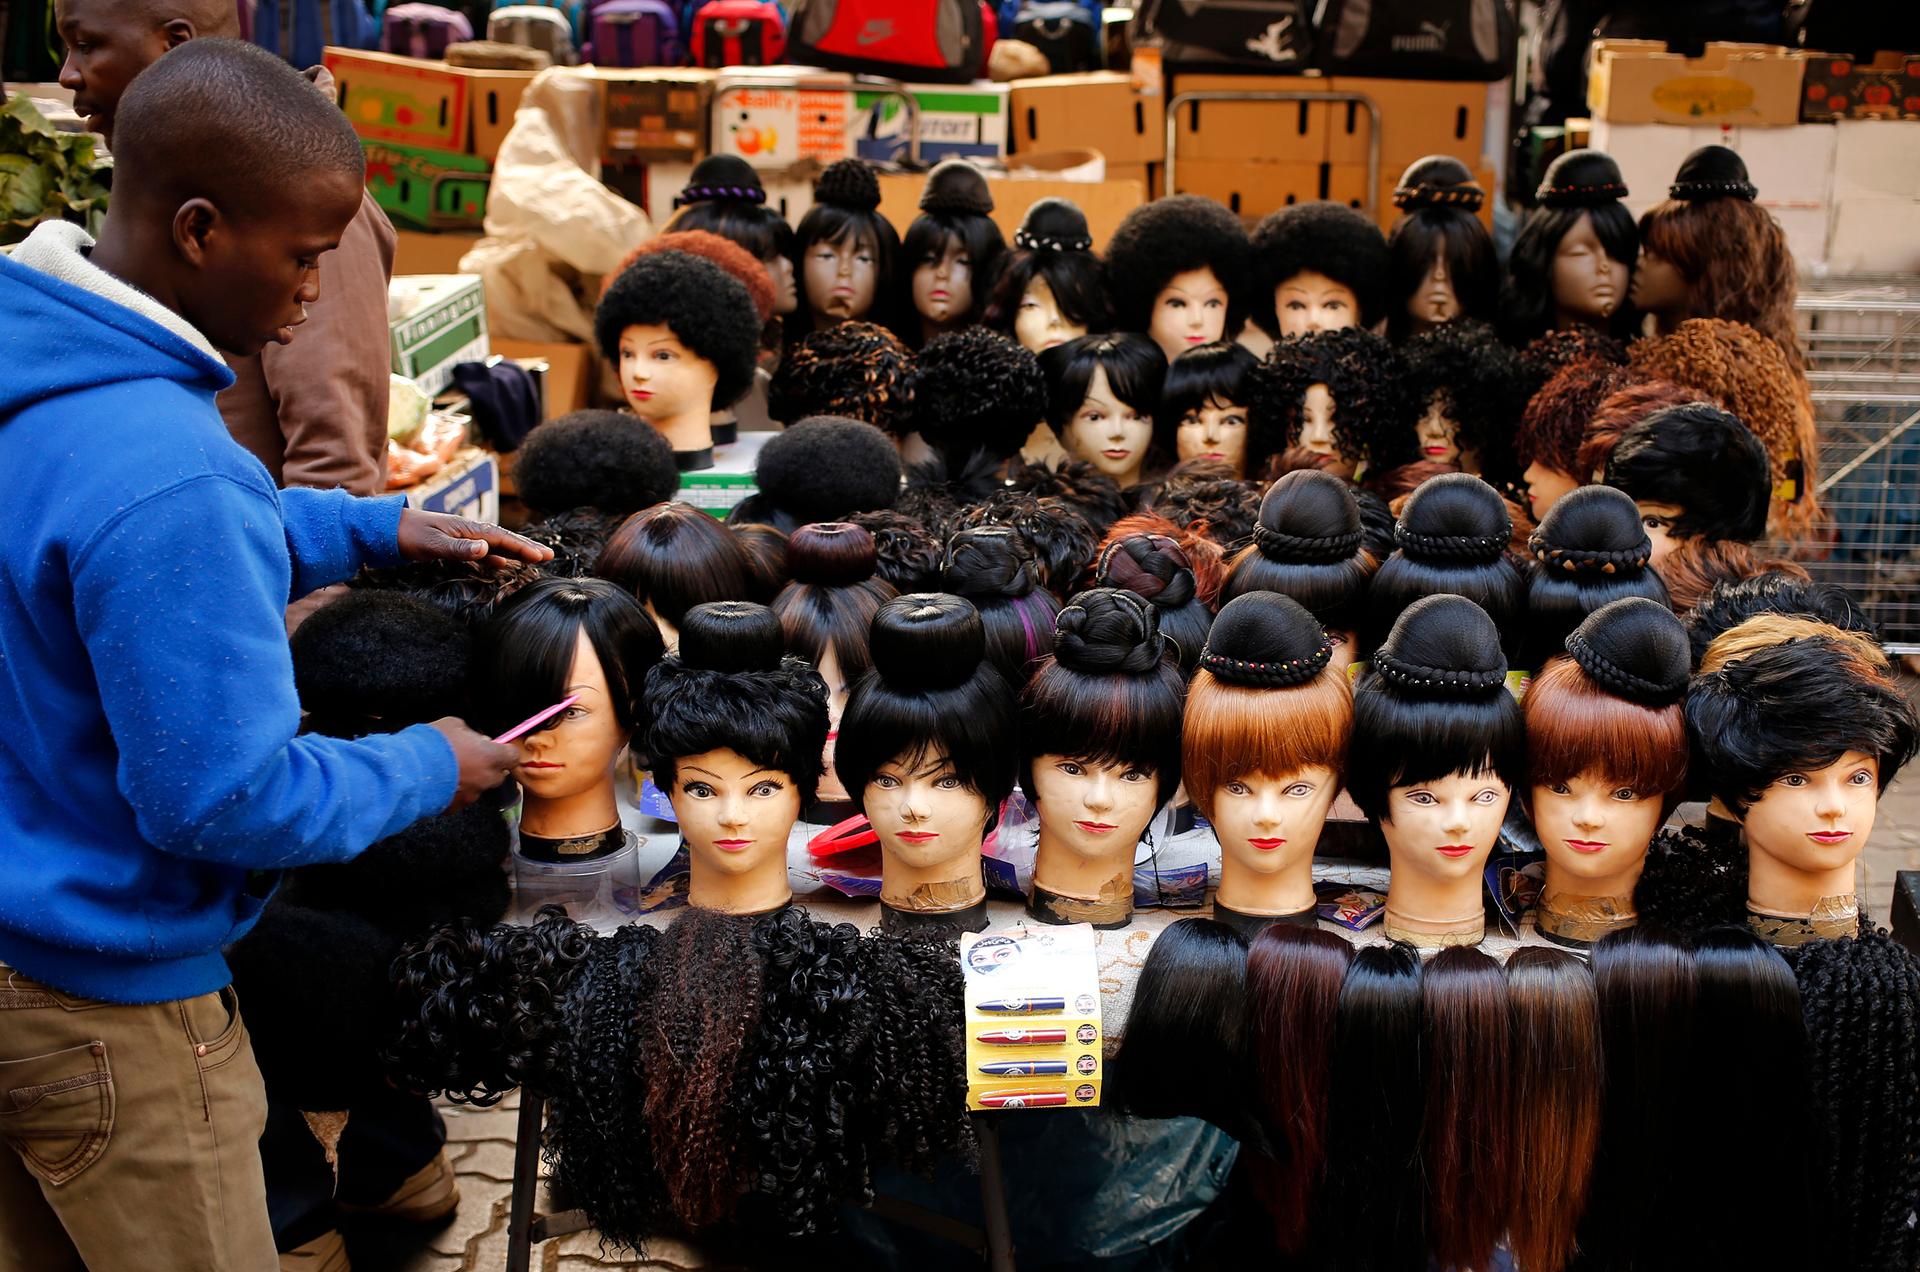 A man prepares wigs as he waits for customers in downtown Johannesburg.